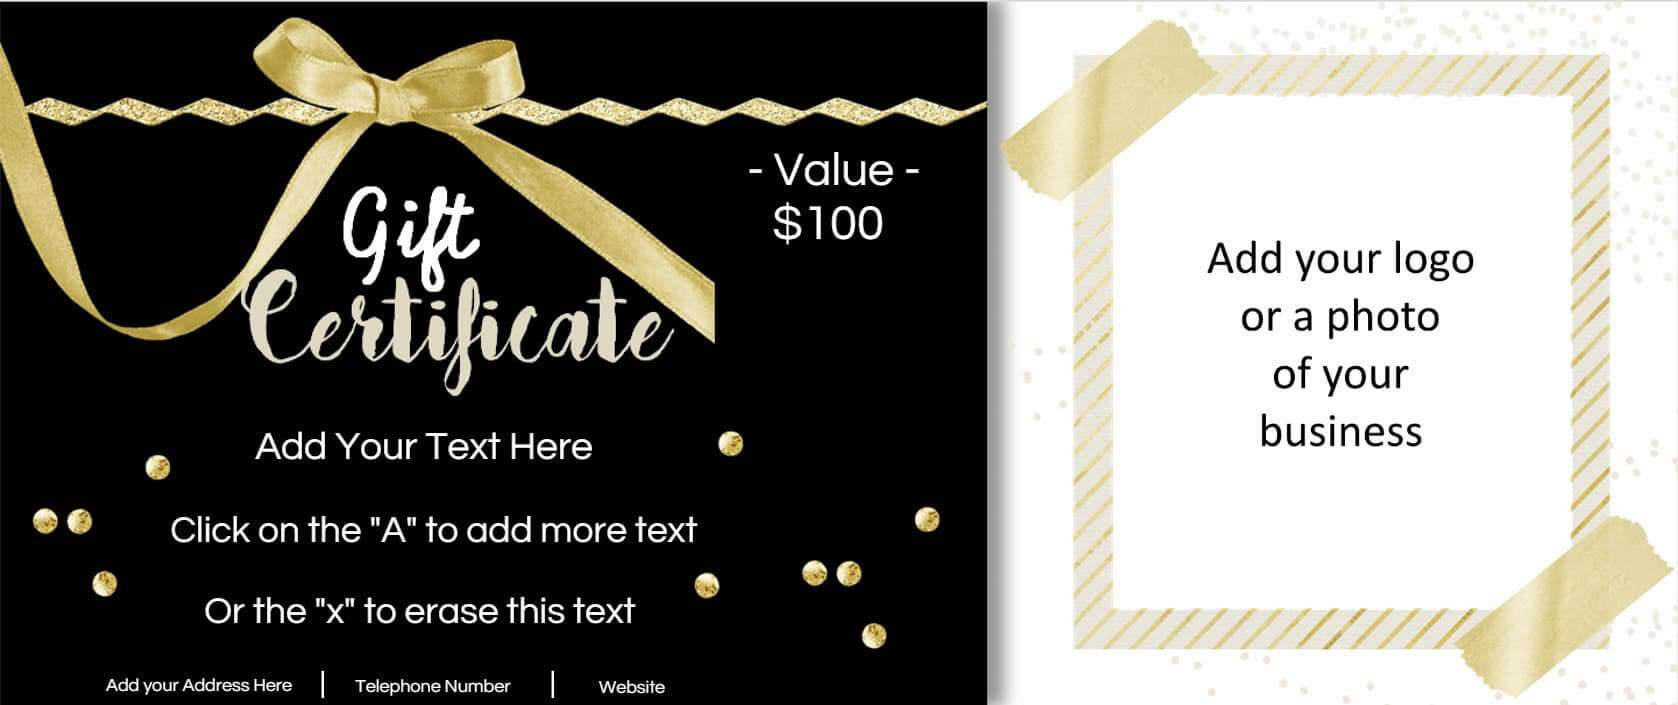 How To Make Gift Certificates For Your Business - Papele Within Custom Gift Certificate Template